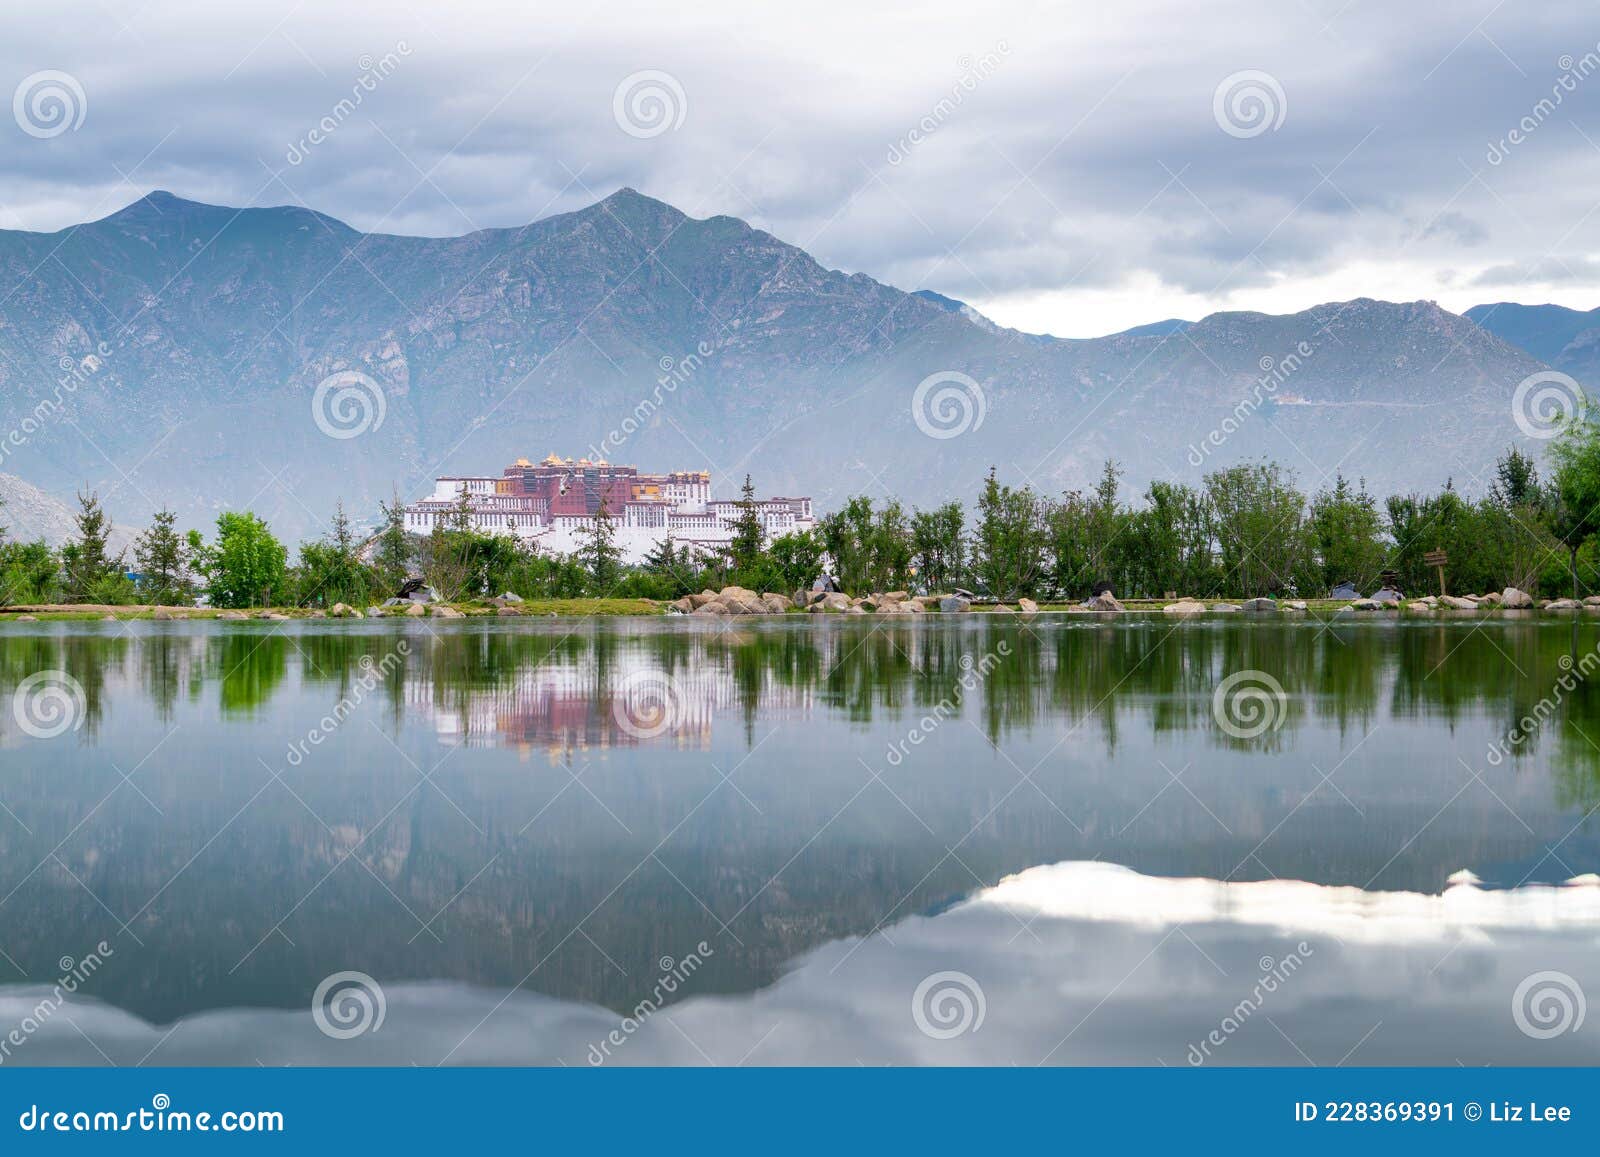 the potala palace, the holy place of tibetan buddhism